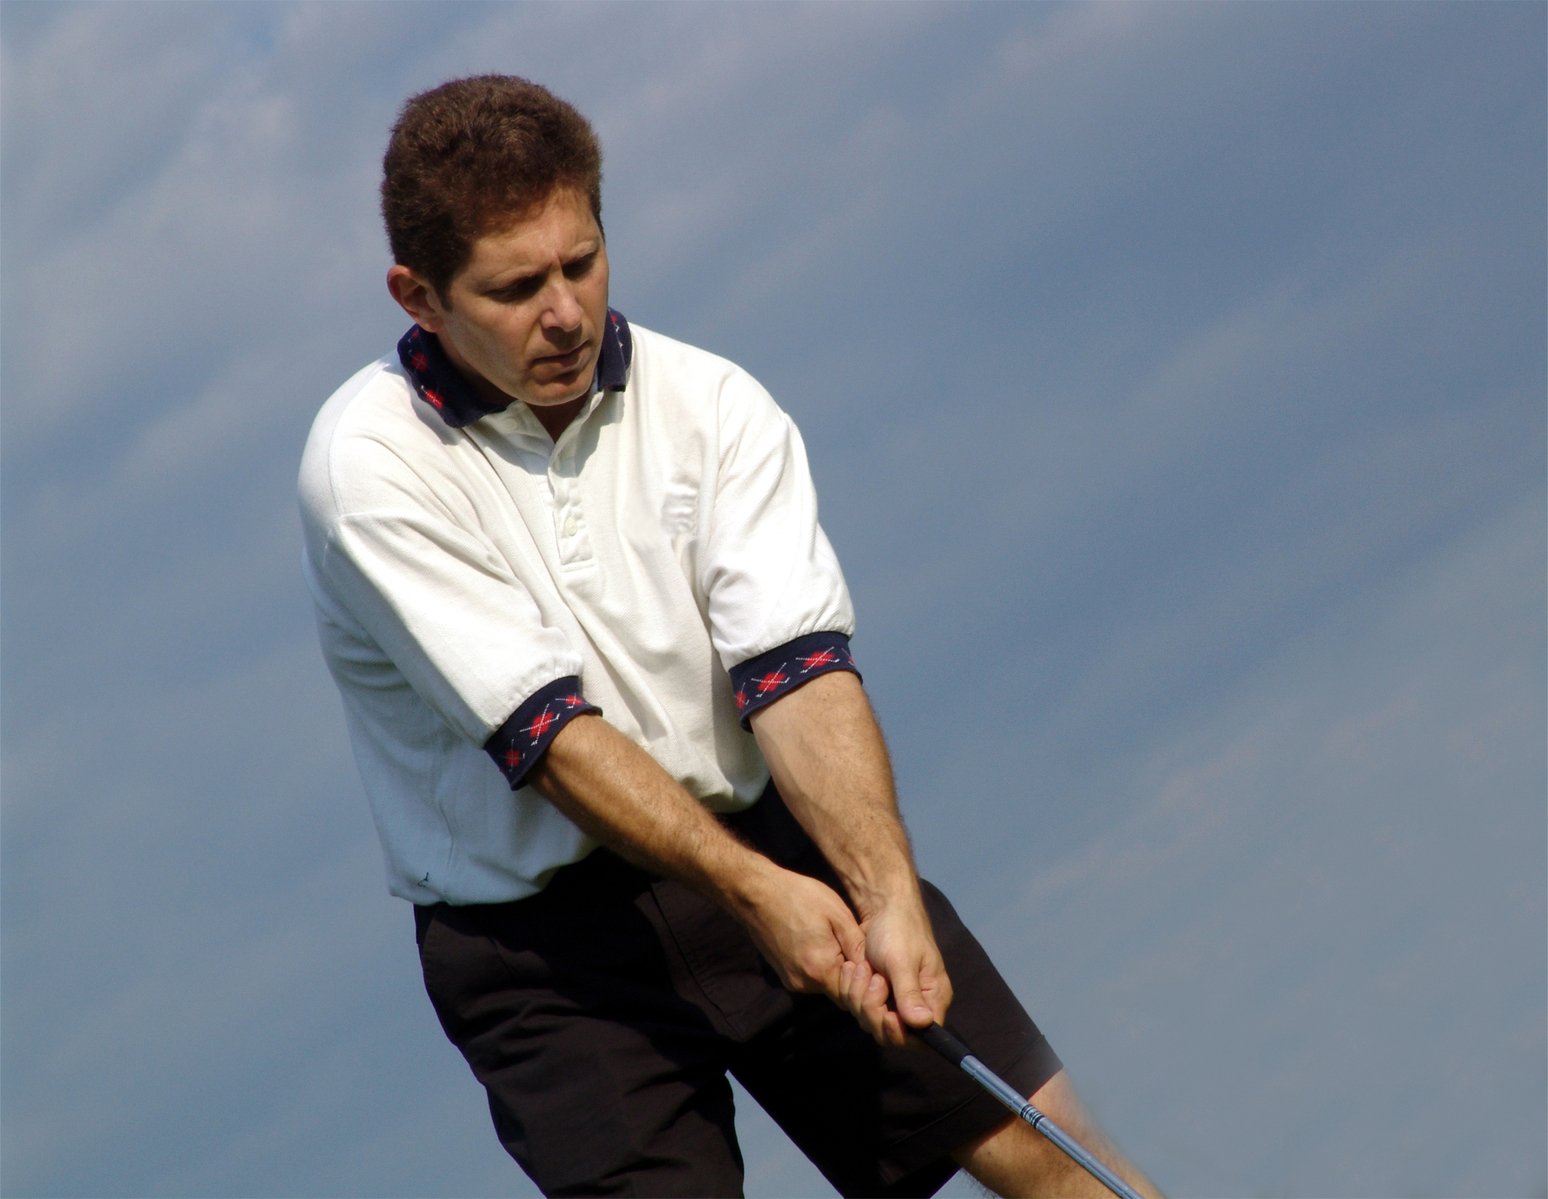 a man swinging a golf club in front of blue skies